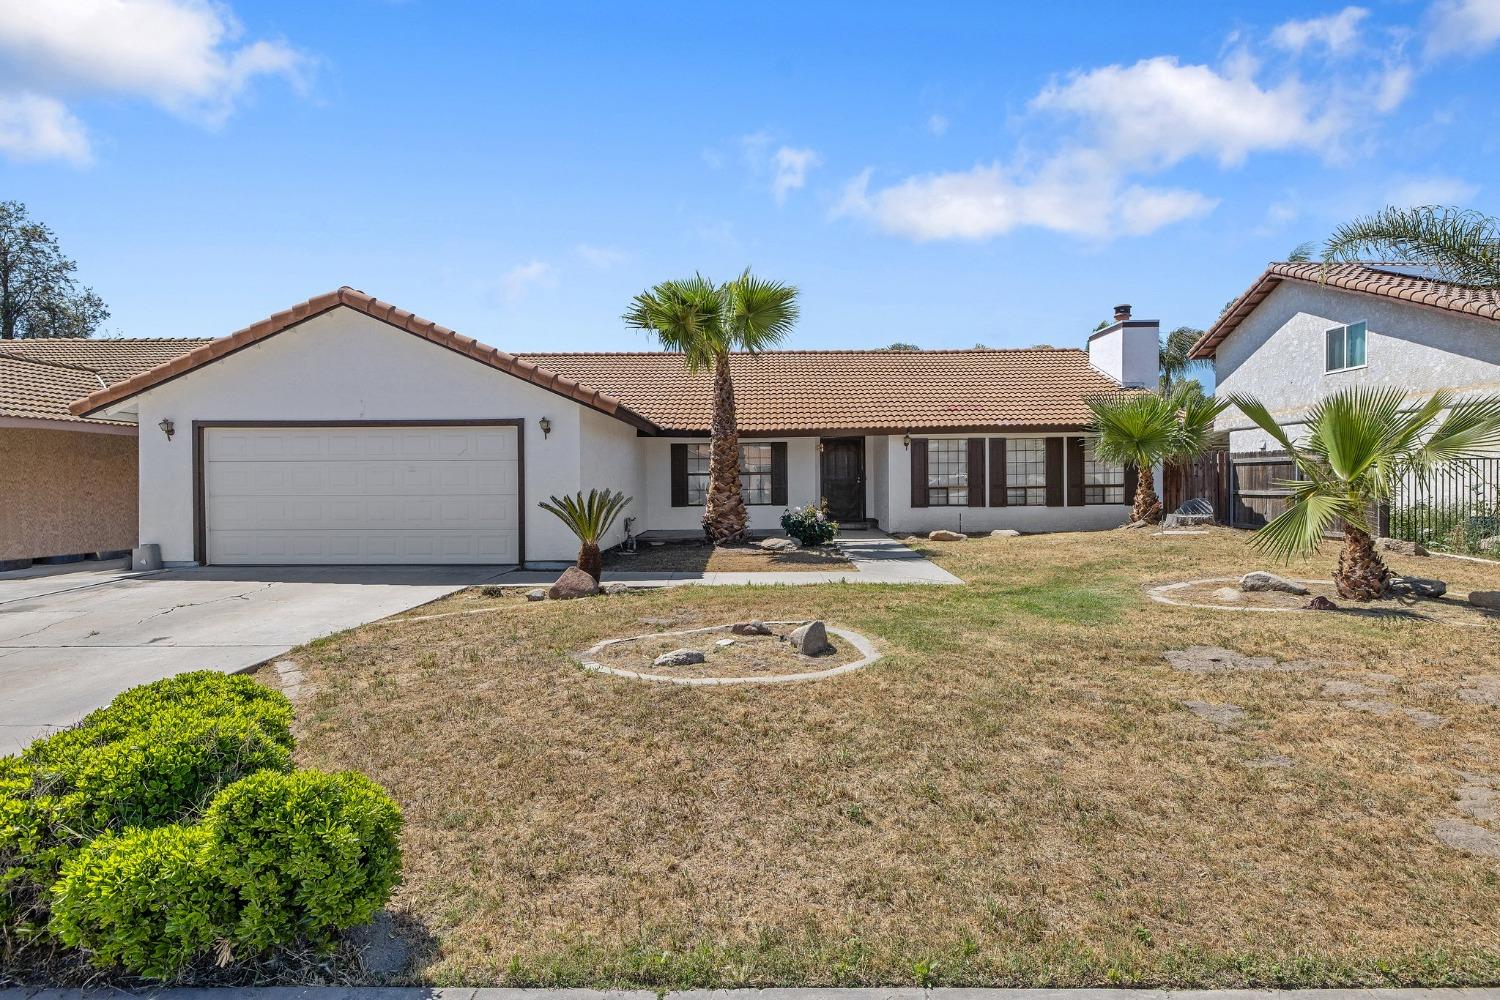 Photo of 2356 N 11th Ave in Hanford, CA